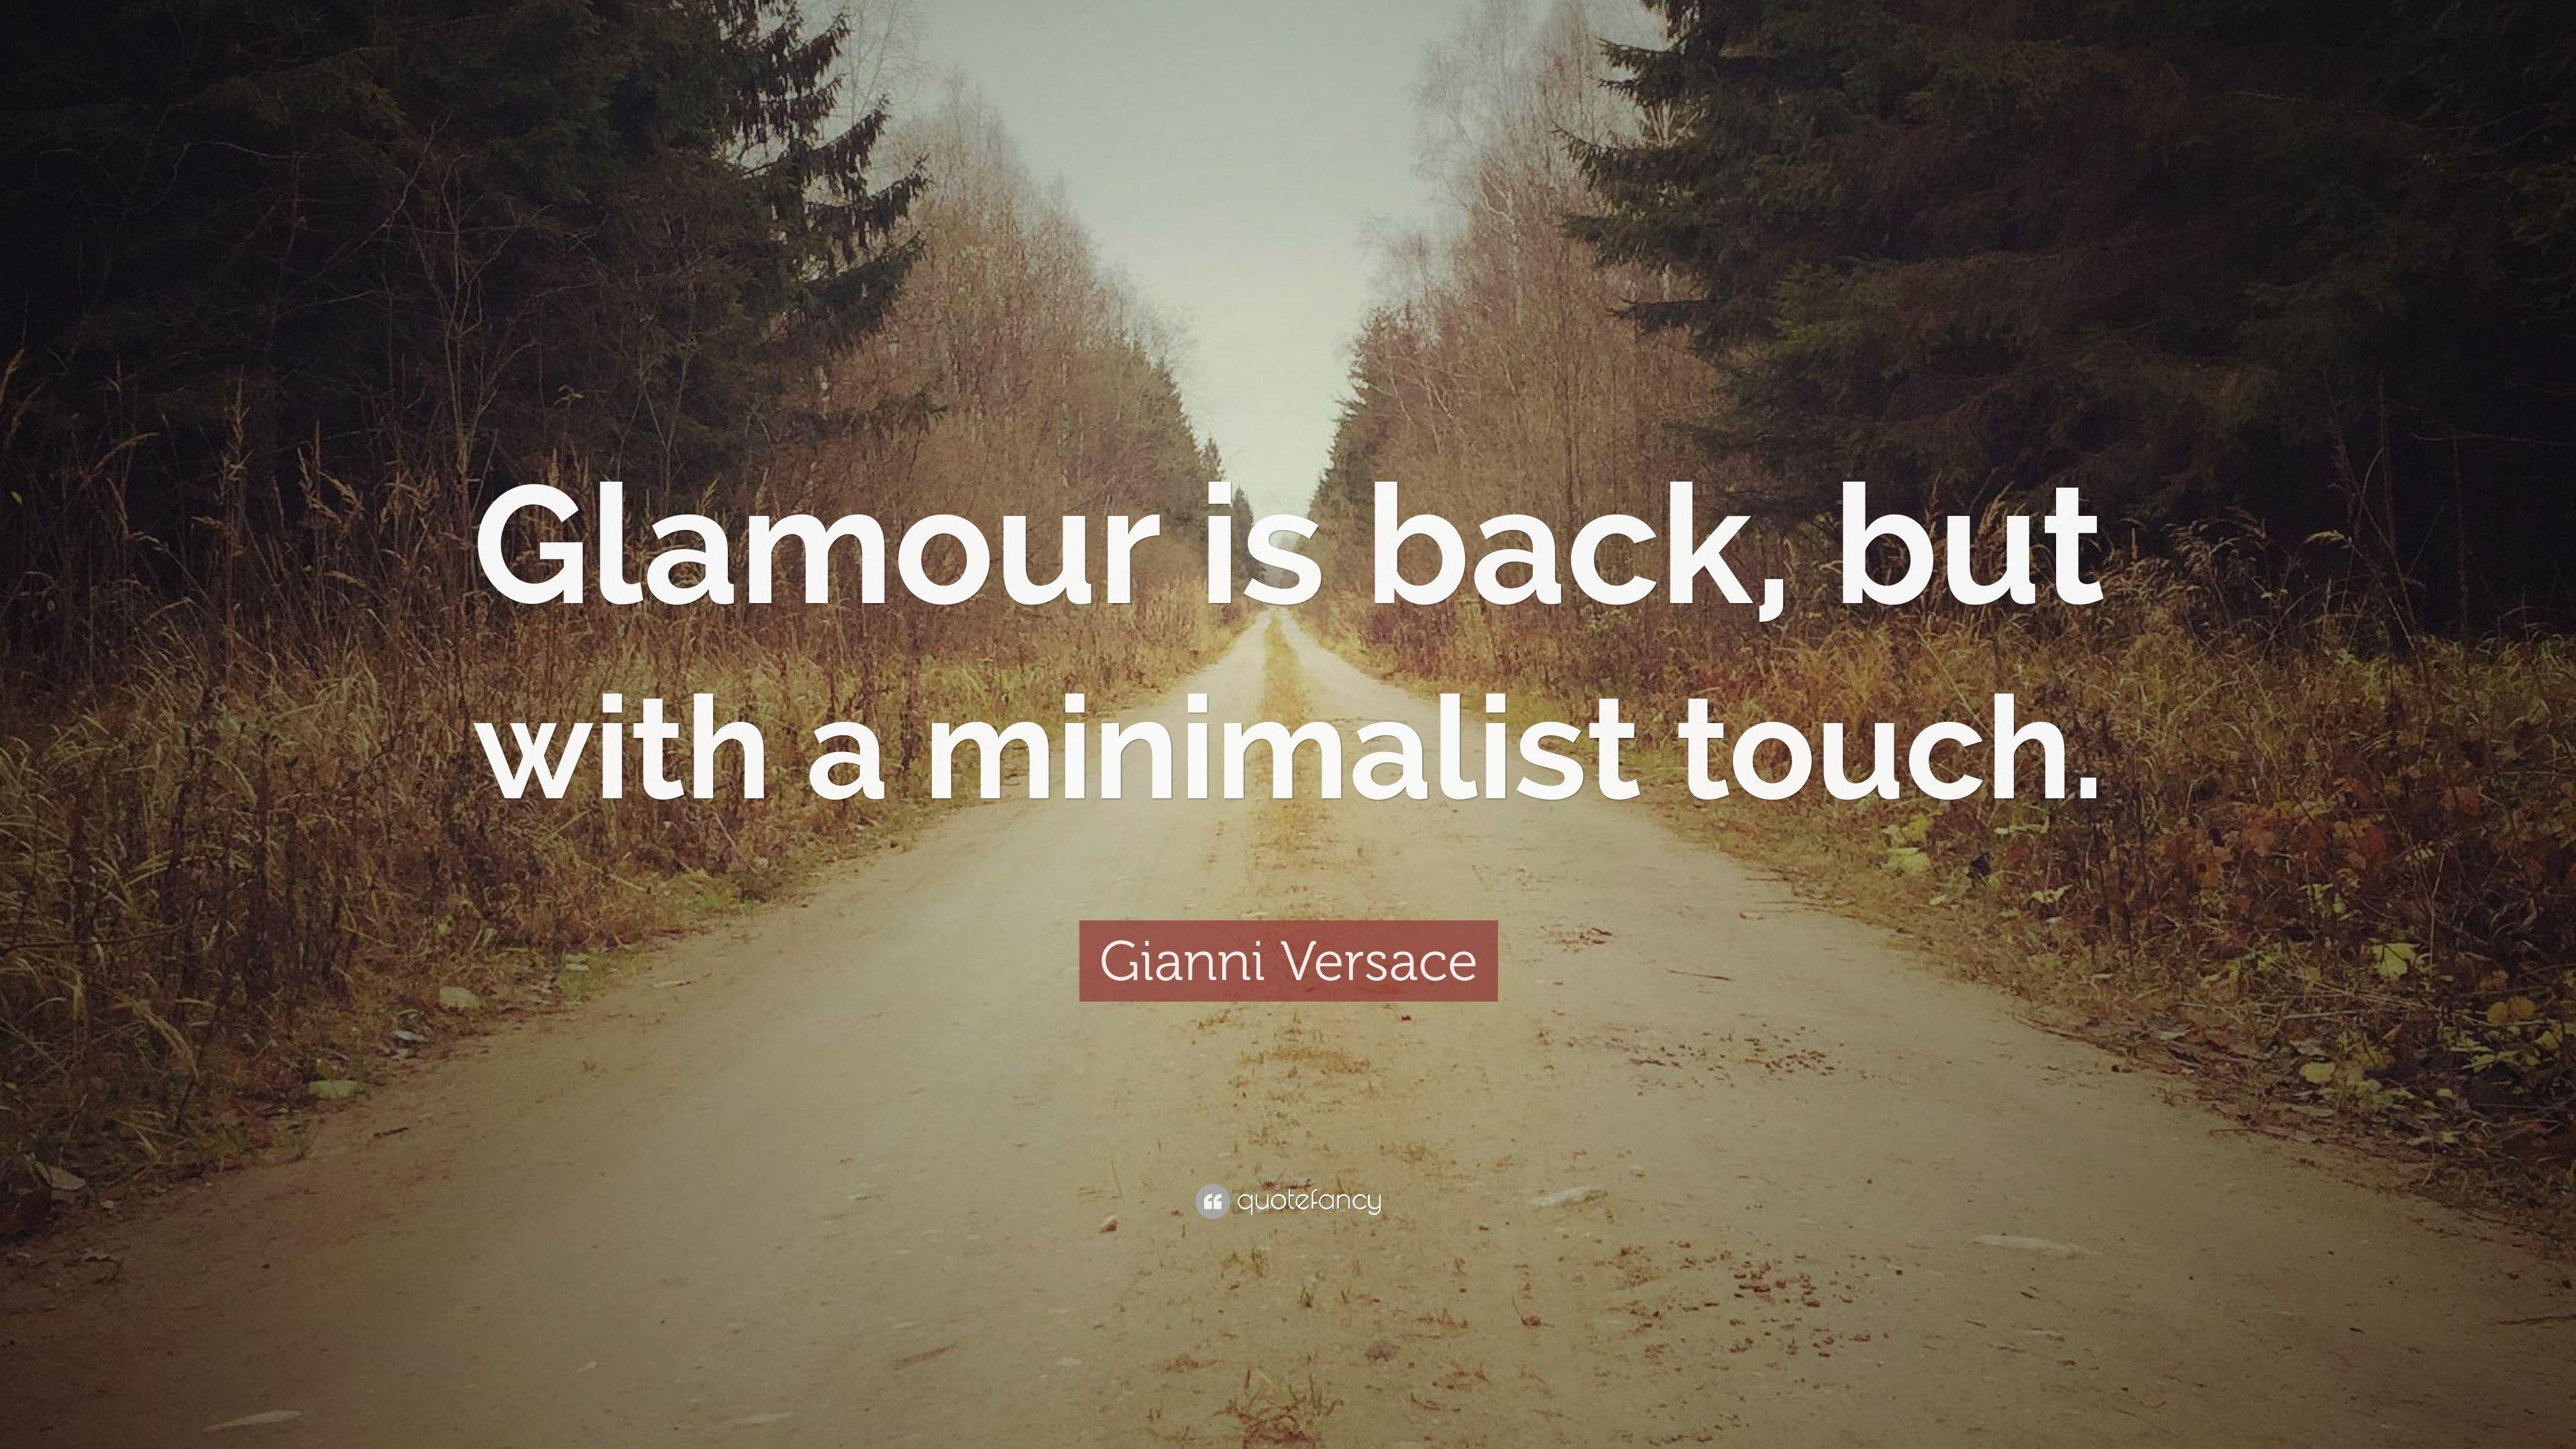 Gianni Versace Quote: “Glamour is back, but with a minimalist